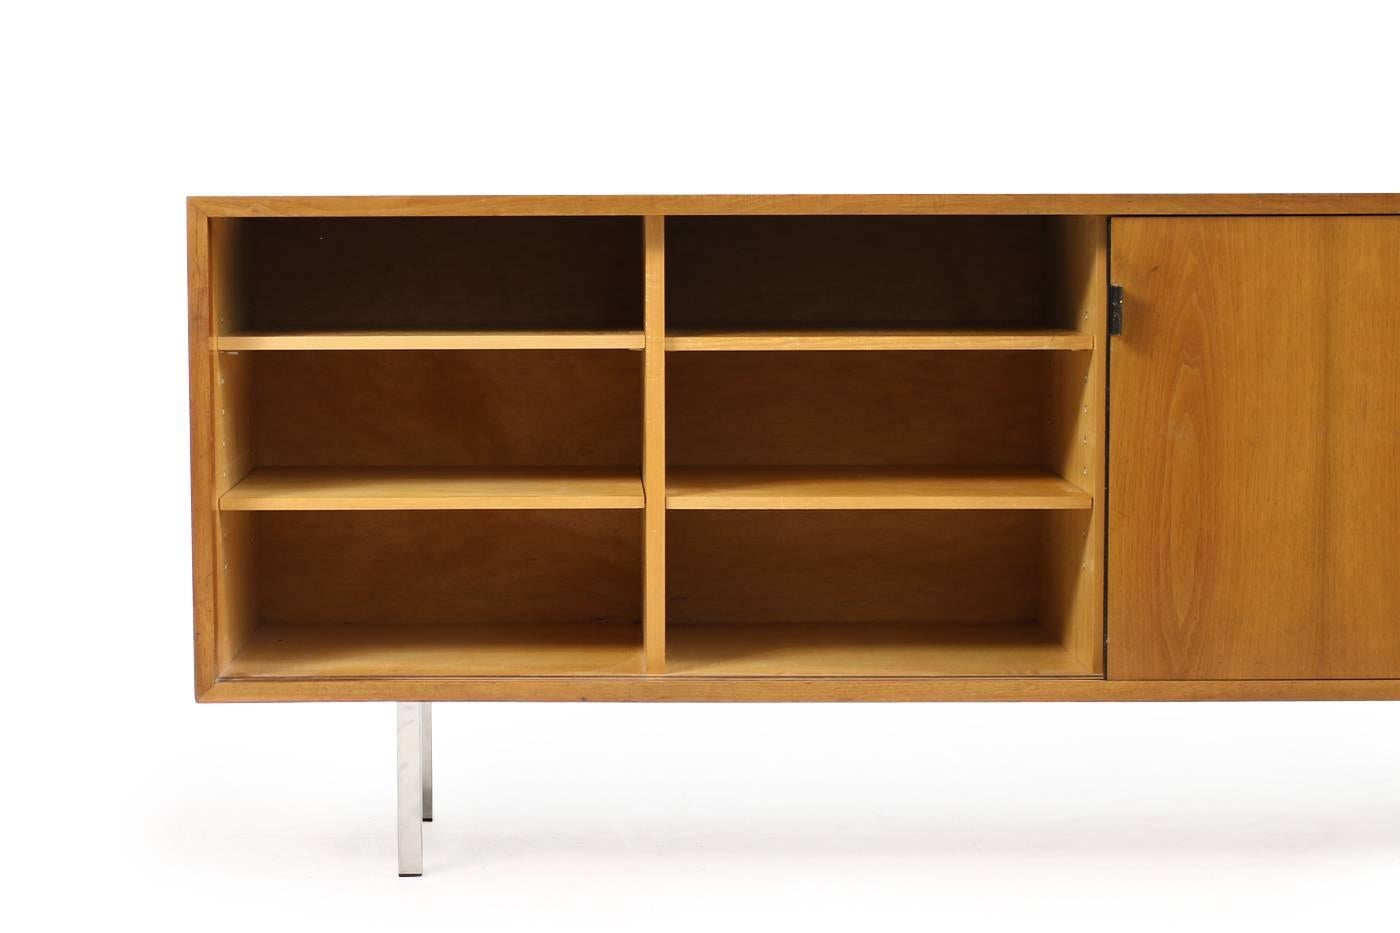 Rare 1950s Florence Knoll Mod. 116 Cherrywood Sideboard Knoll International In Good Condition For Sale In Hamminkeln, DE